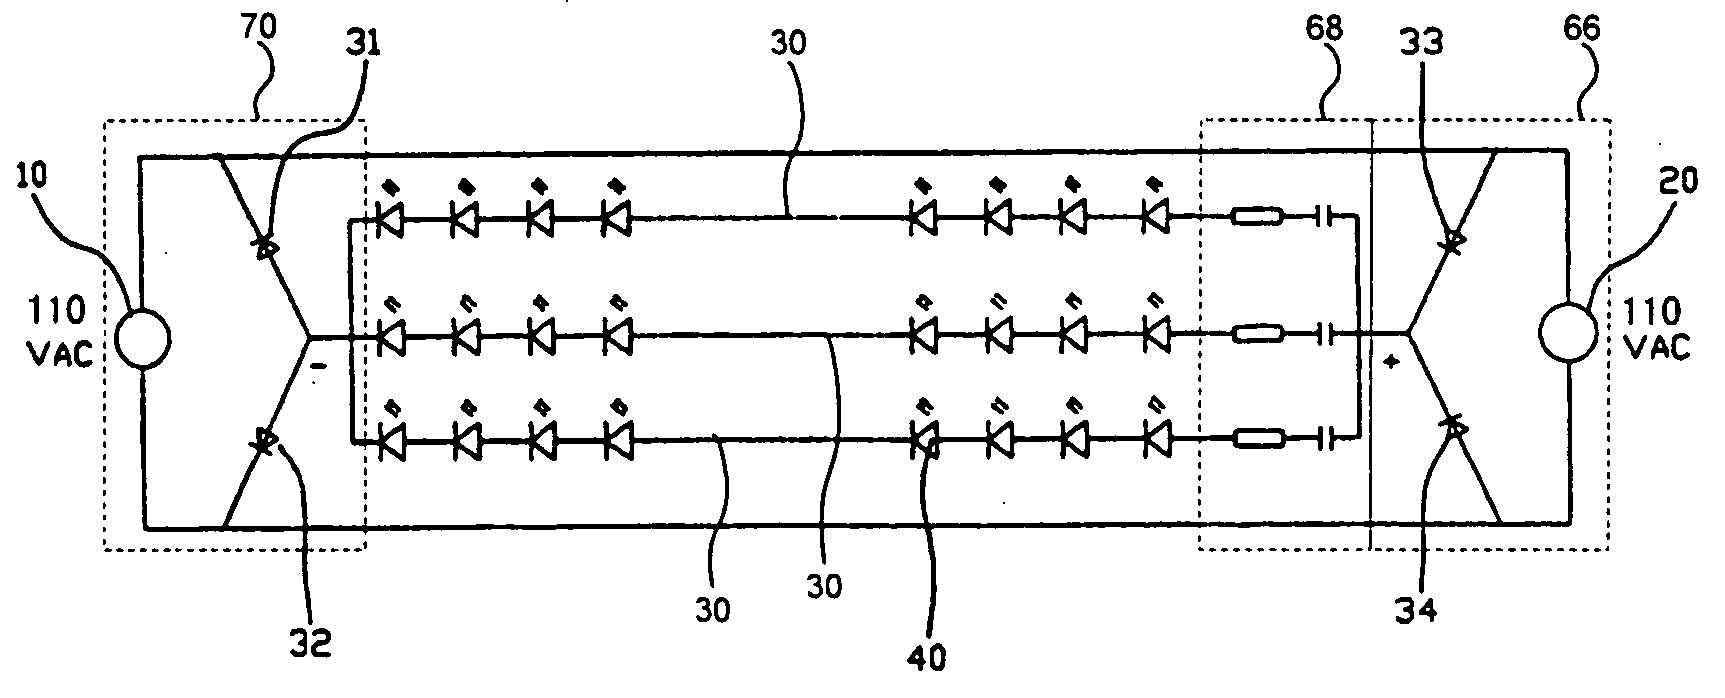 Structure for LED lighting chain